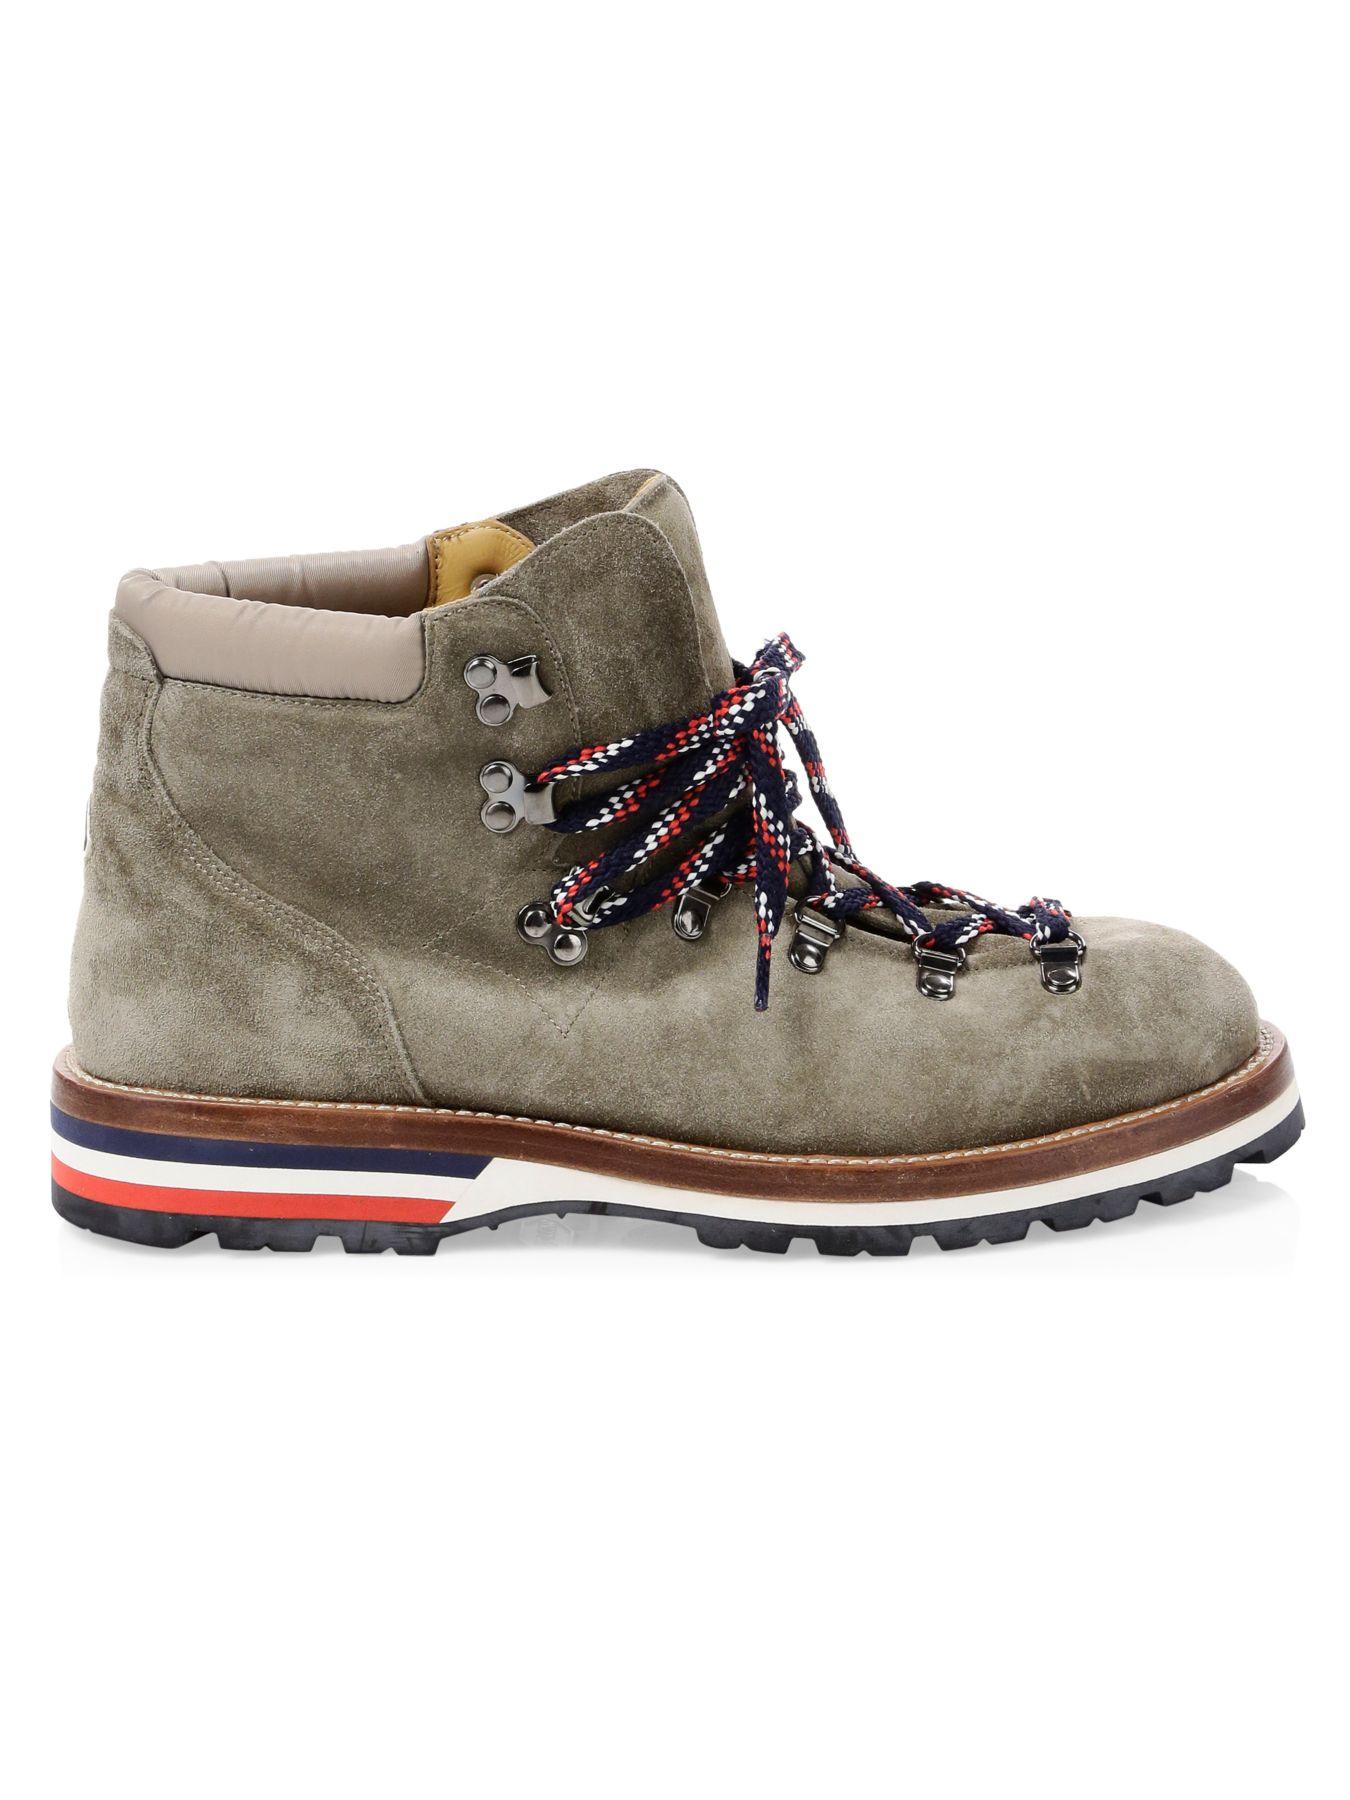 Moncler Peak Scarpa Suede Hiking Boots in Taupe (Brown) for Men - Lyst